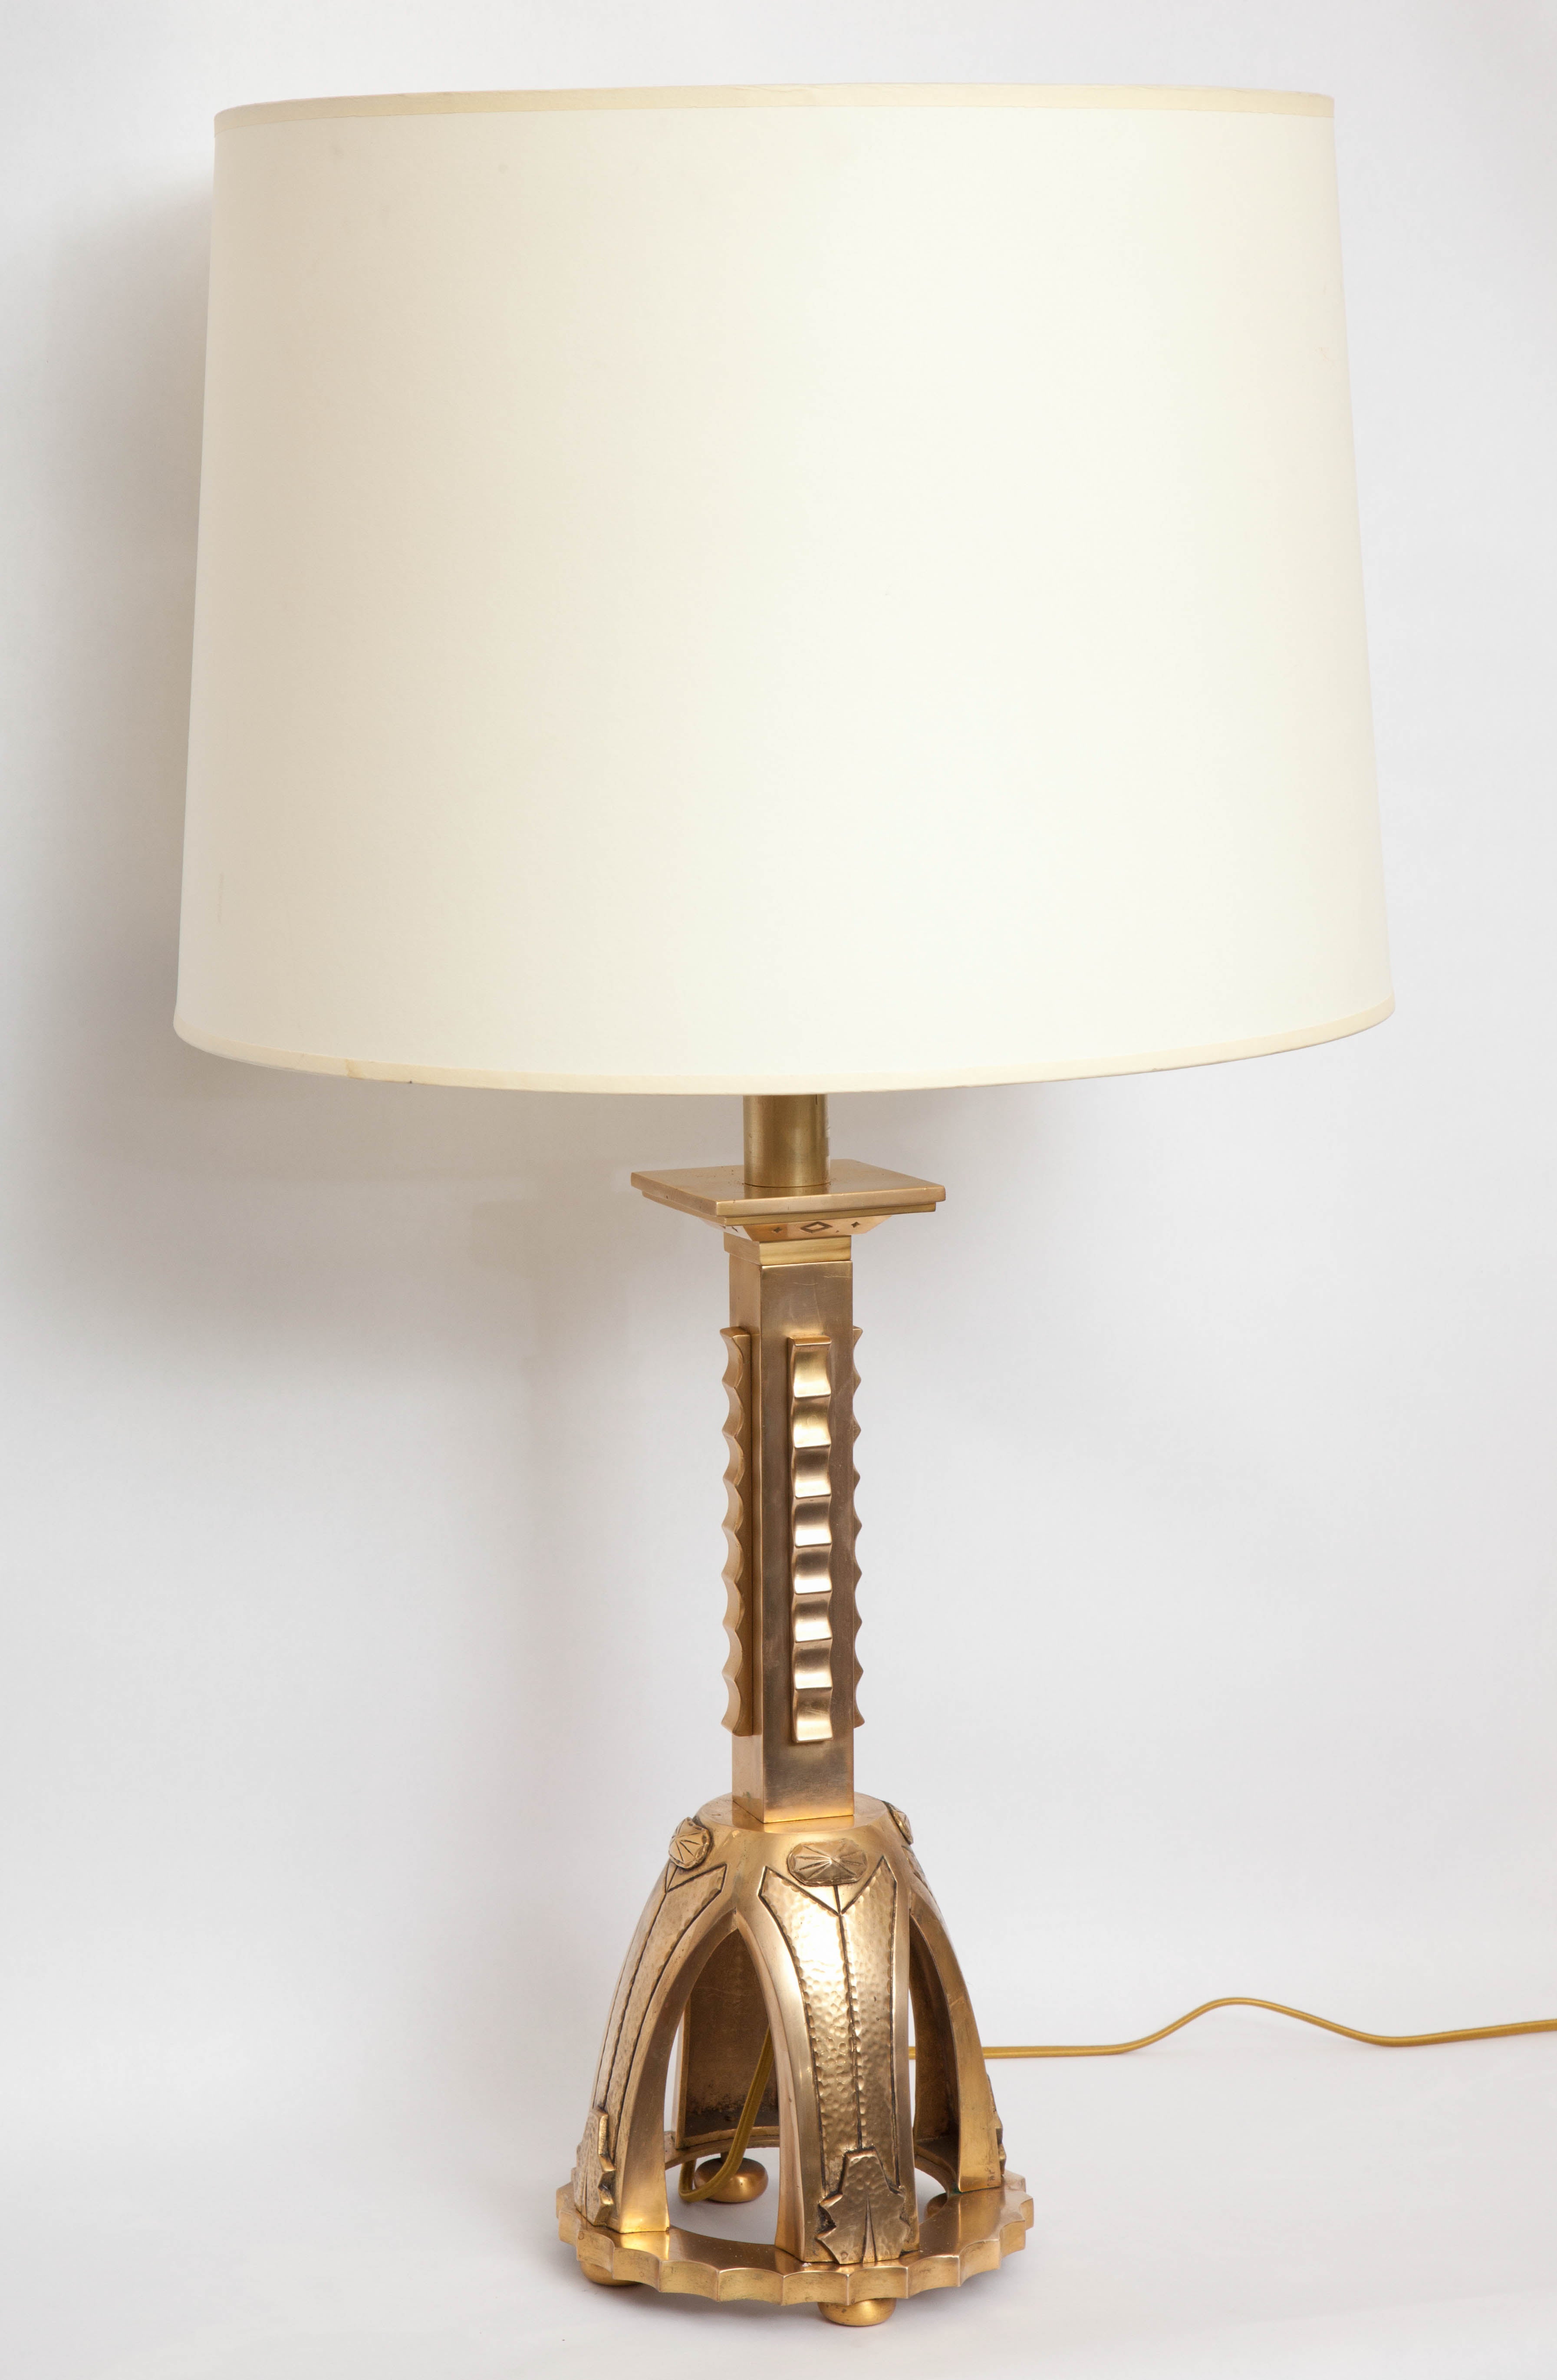 Table Lamps Pair Art Deco France 1930's
New Sockets and Rewired
Shades not included